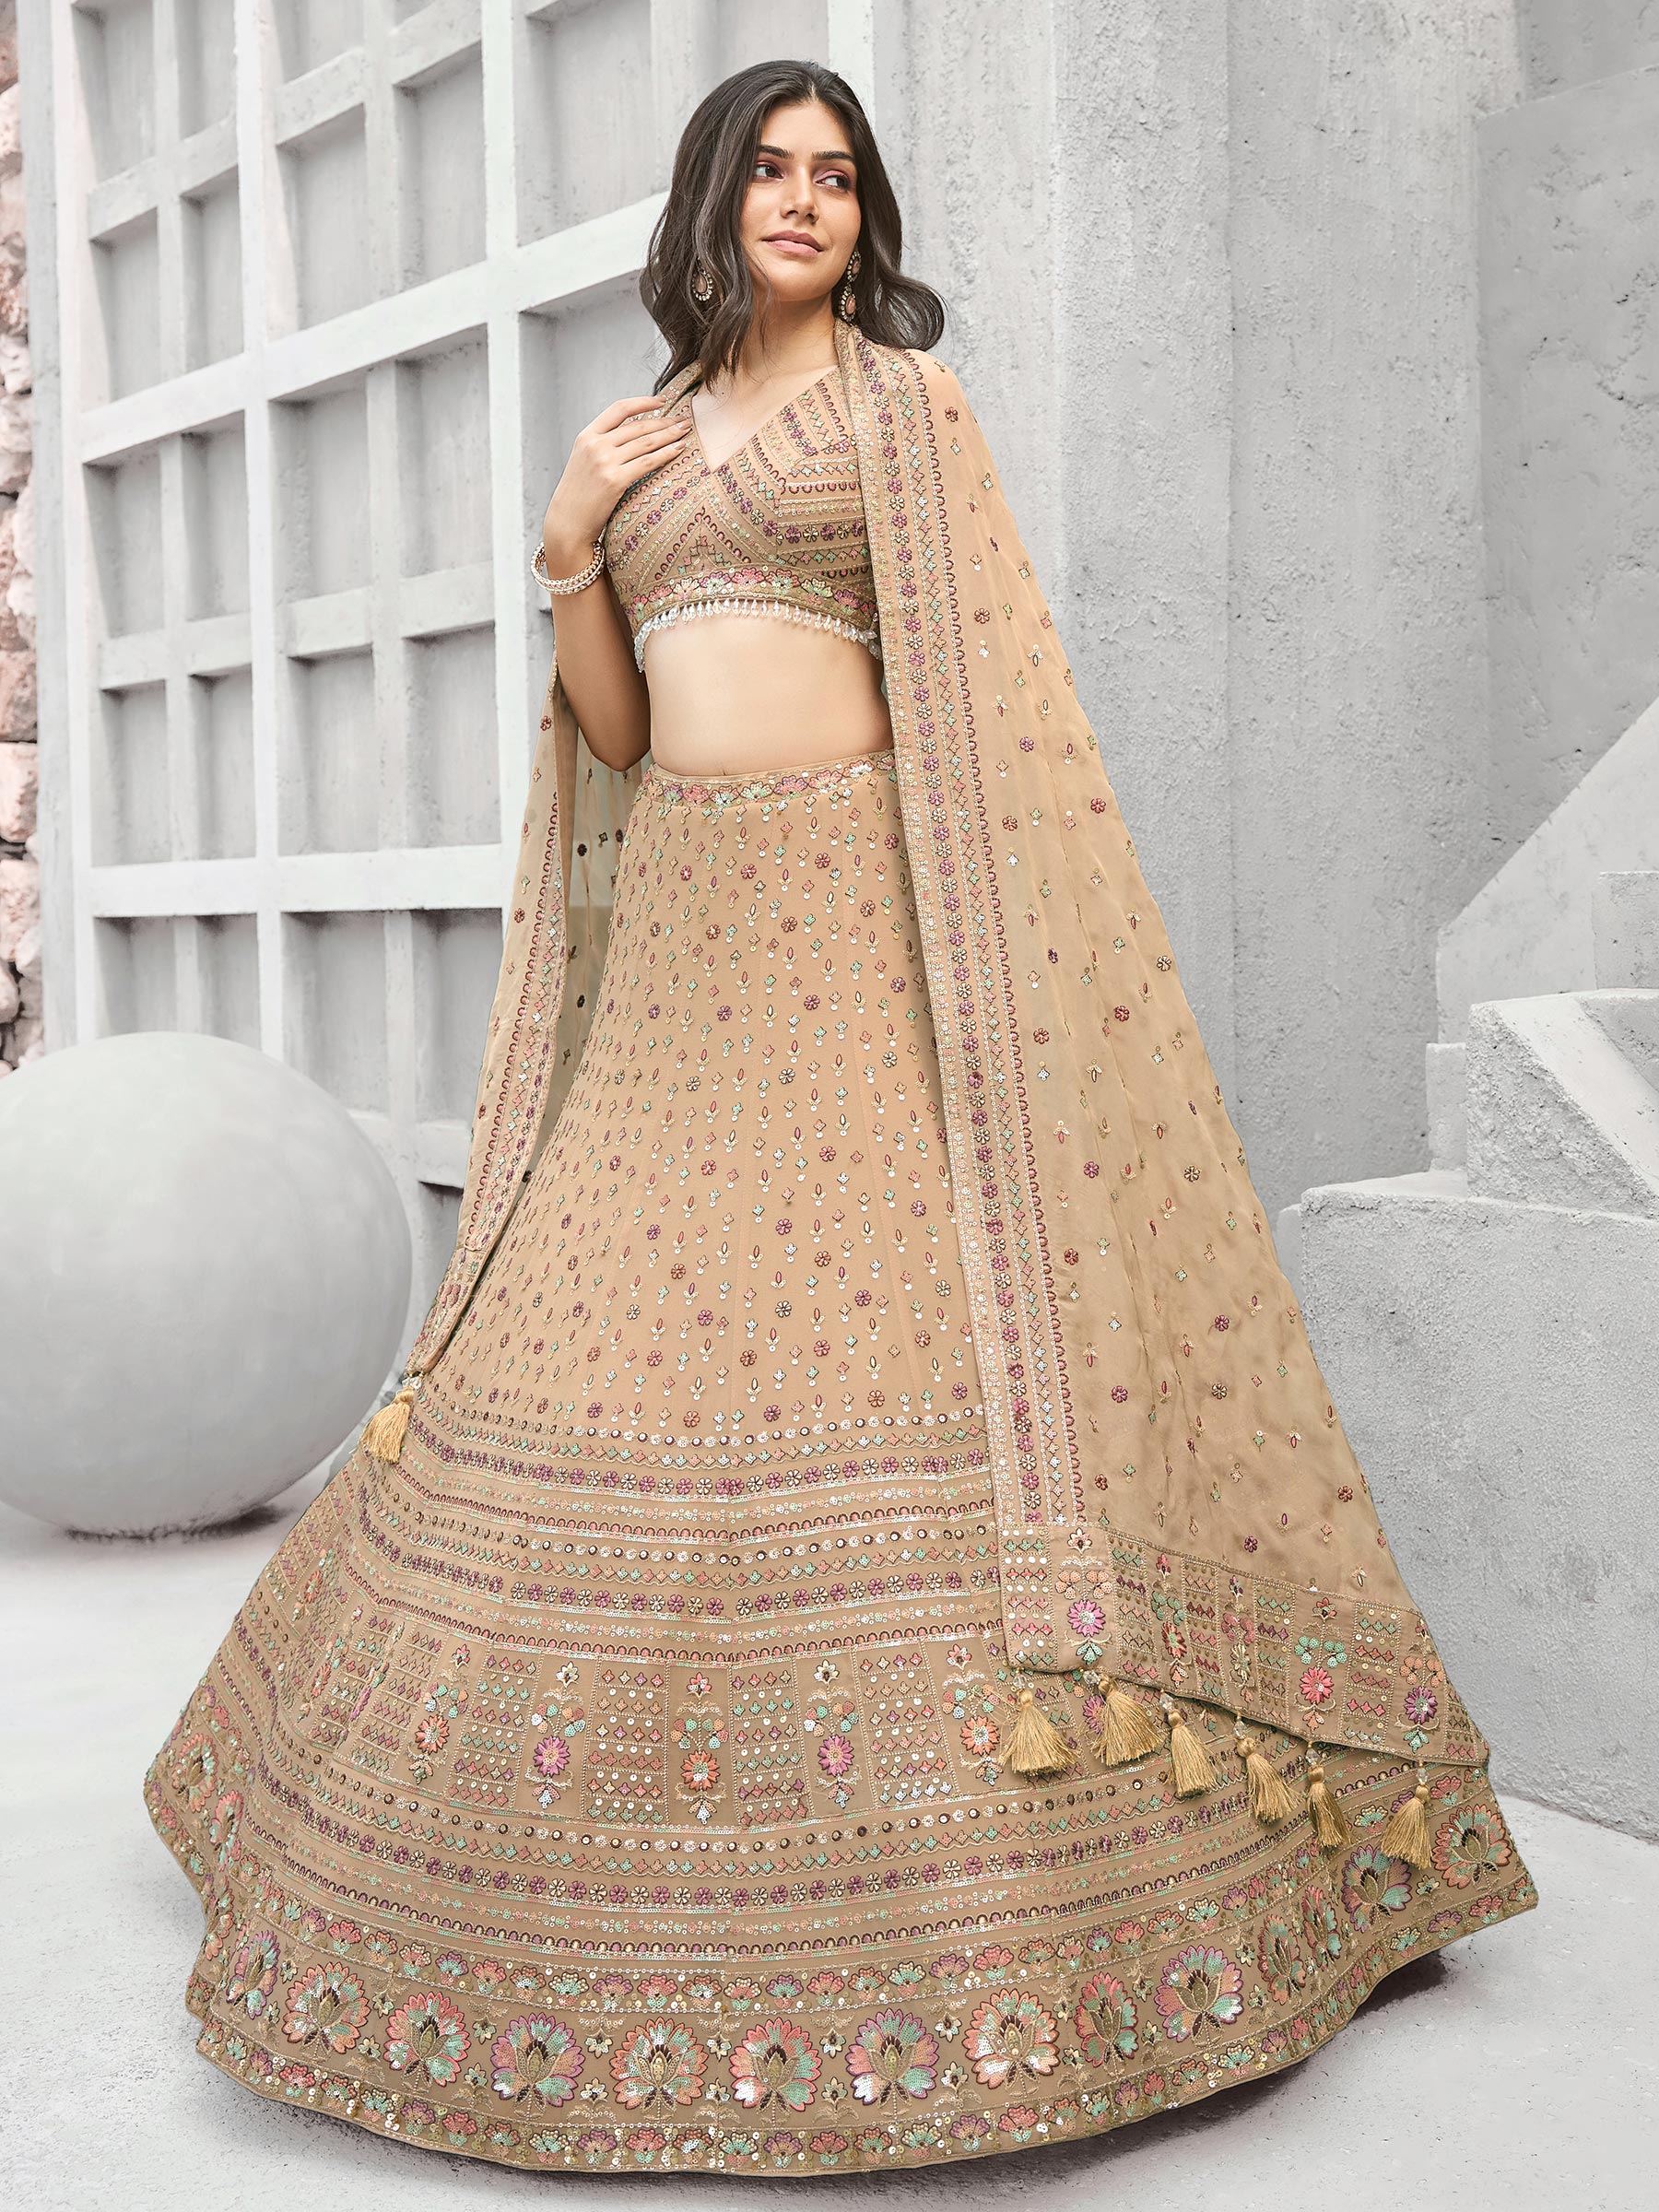 MYNTRA BY YOUR CHOICE GEORGETTE SKIRT PATTERN NEW EXCLUSIVE GORGEOUS  STUNNING DASHING LATEST PARTY WEAR HEAVY FANCY WEDDING BRIDAL DESIGNER LONG  SUITS BEST WHOLESELLER IN INDIA UAE MALAYSIA - Reewaz International |